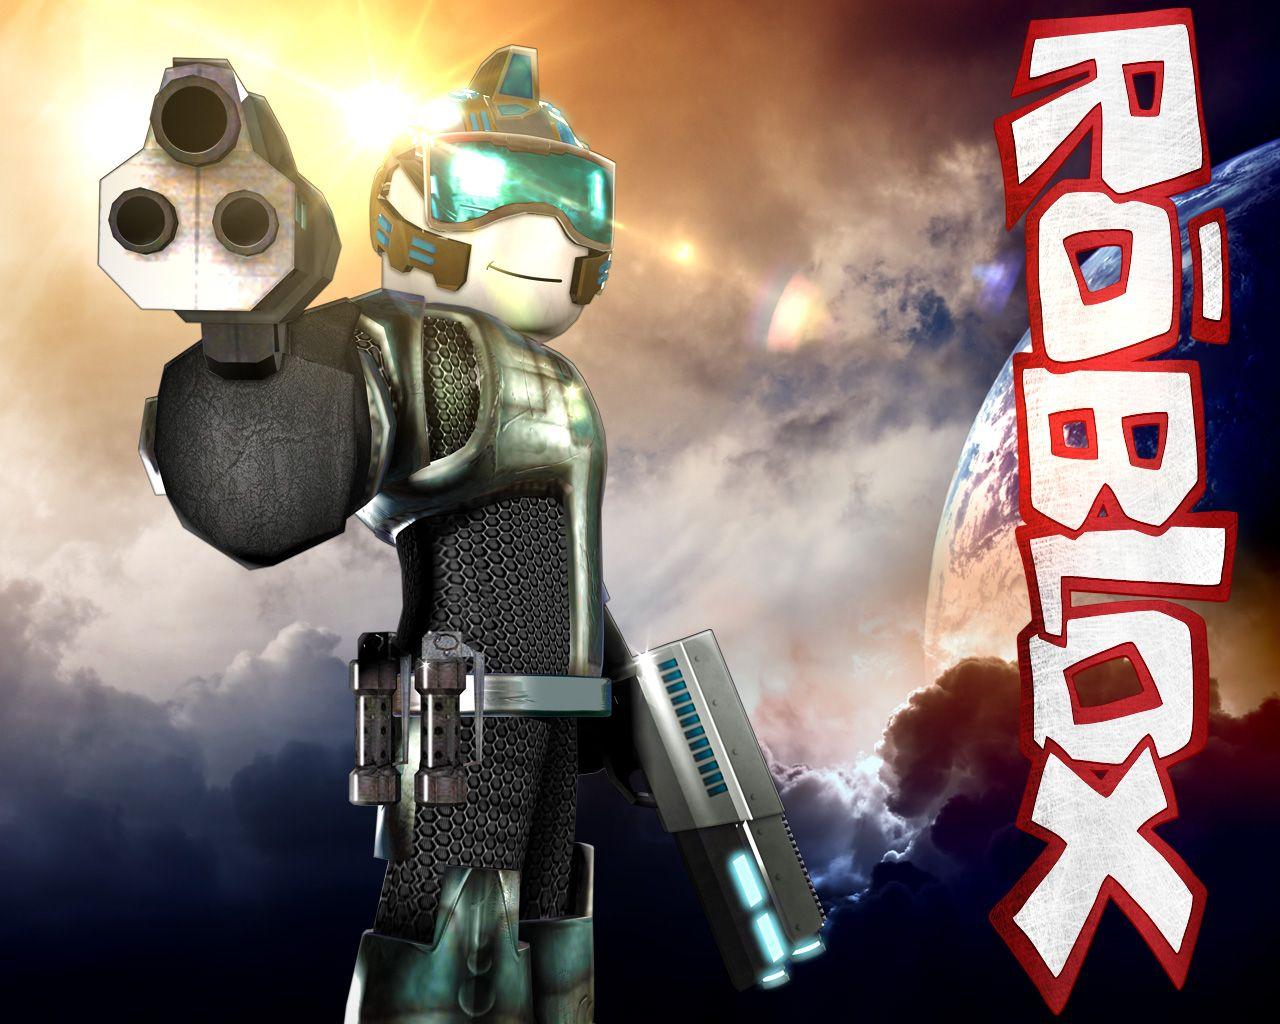 Roblox Wallpapers Top Free Roblox Backgrounds